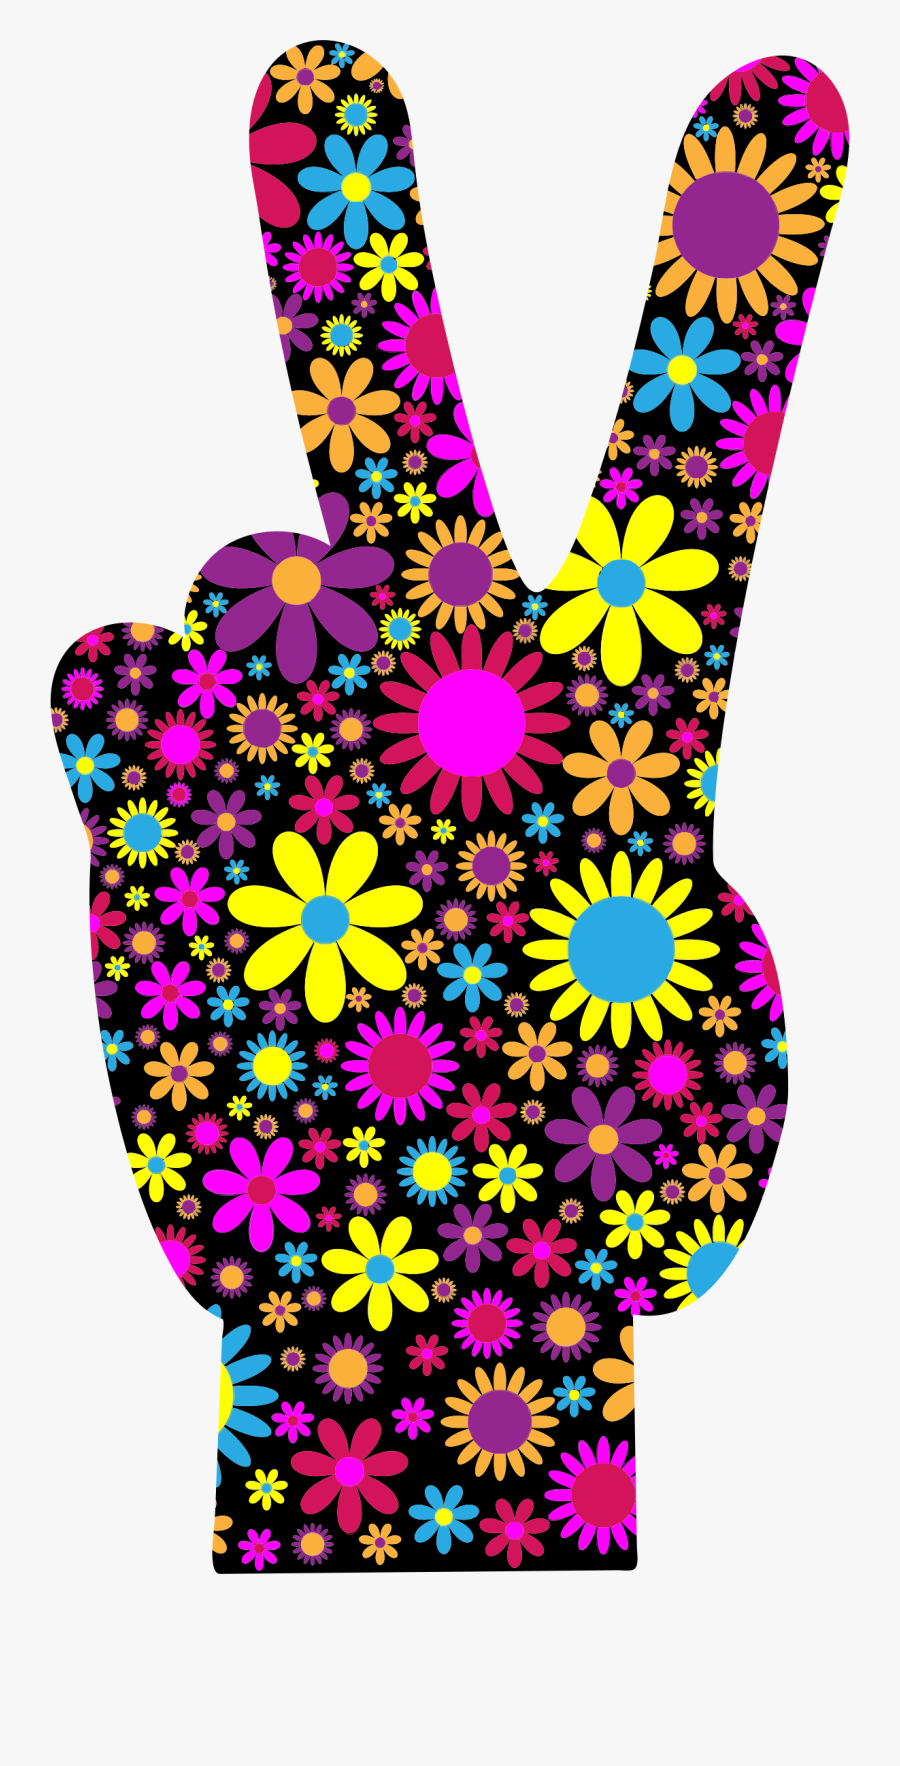 Clipart - Peace Sign With Transparent Background, Transparent Clipart